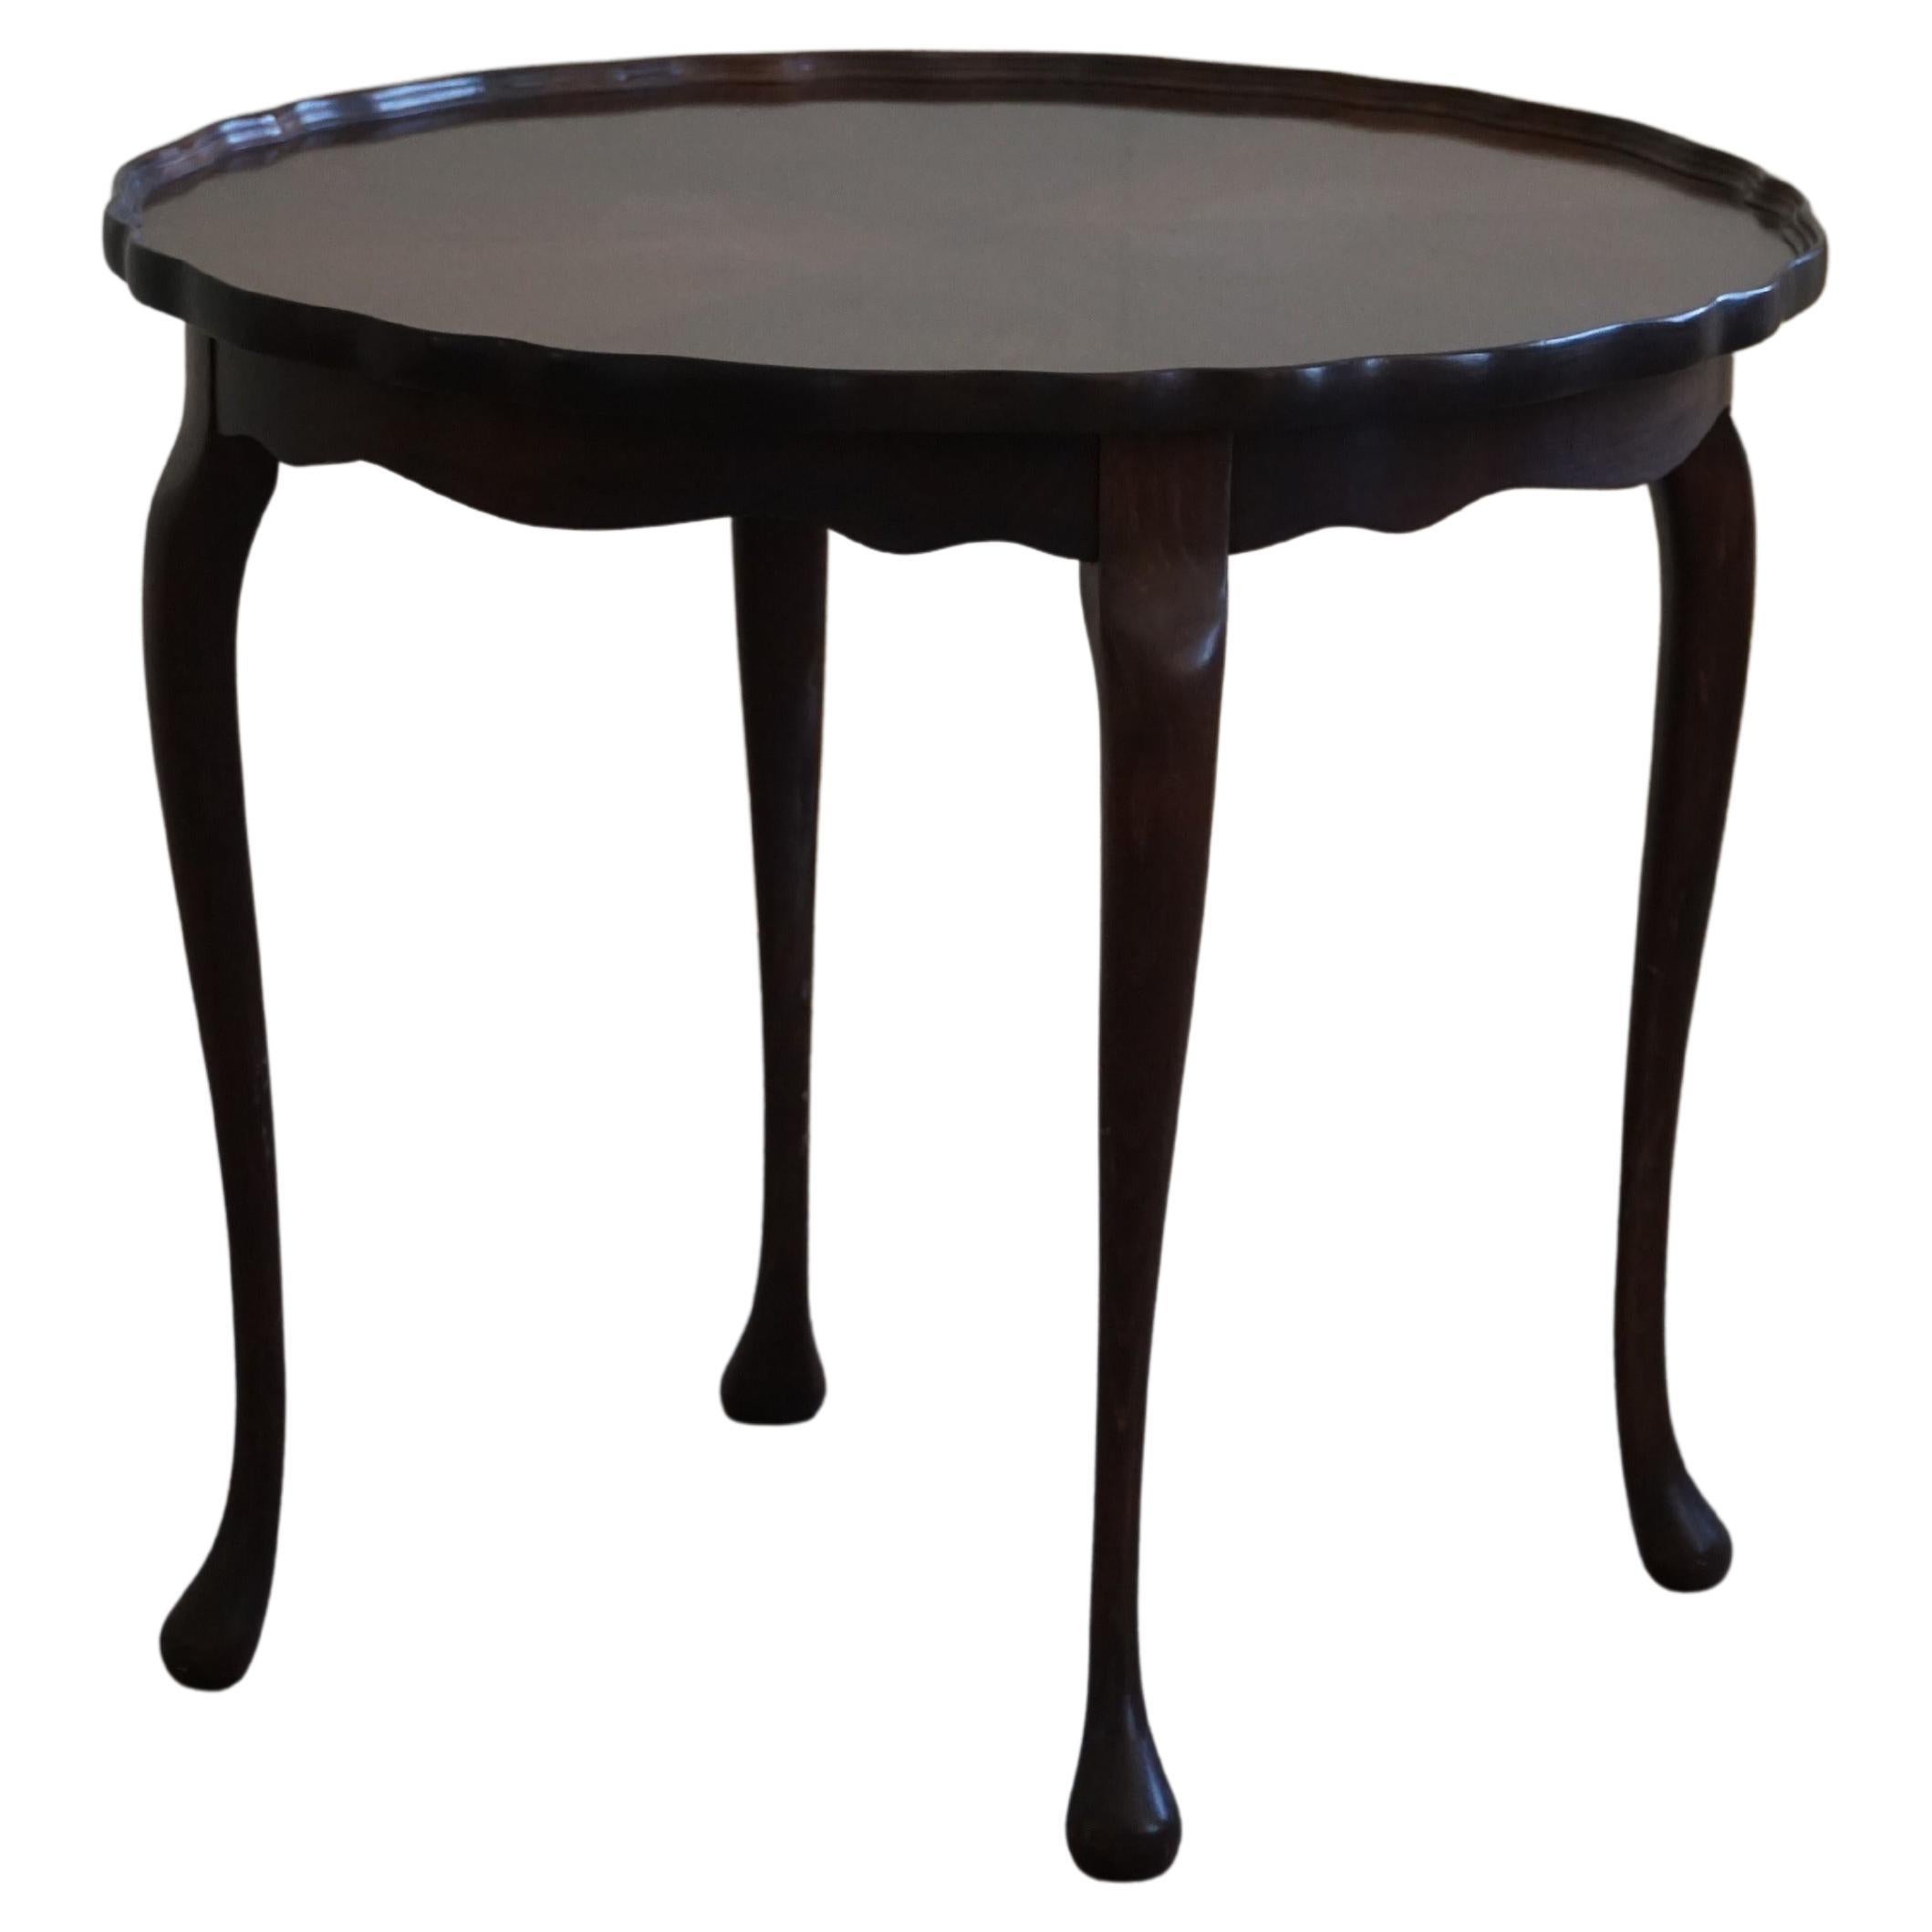 Danish Art Deco Side Table / Coffee Table in Stained Beech, 1940s For Sale